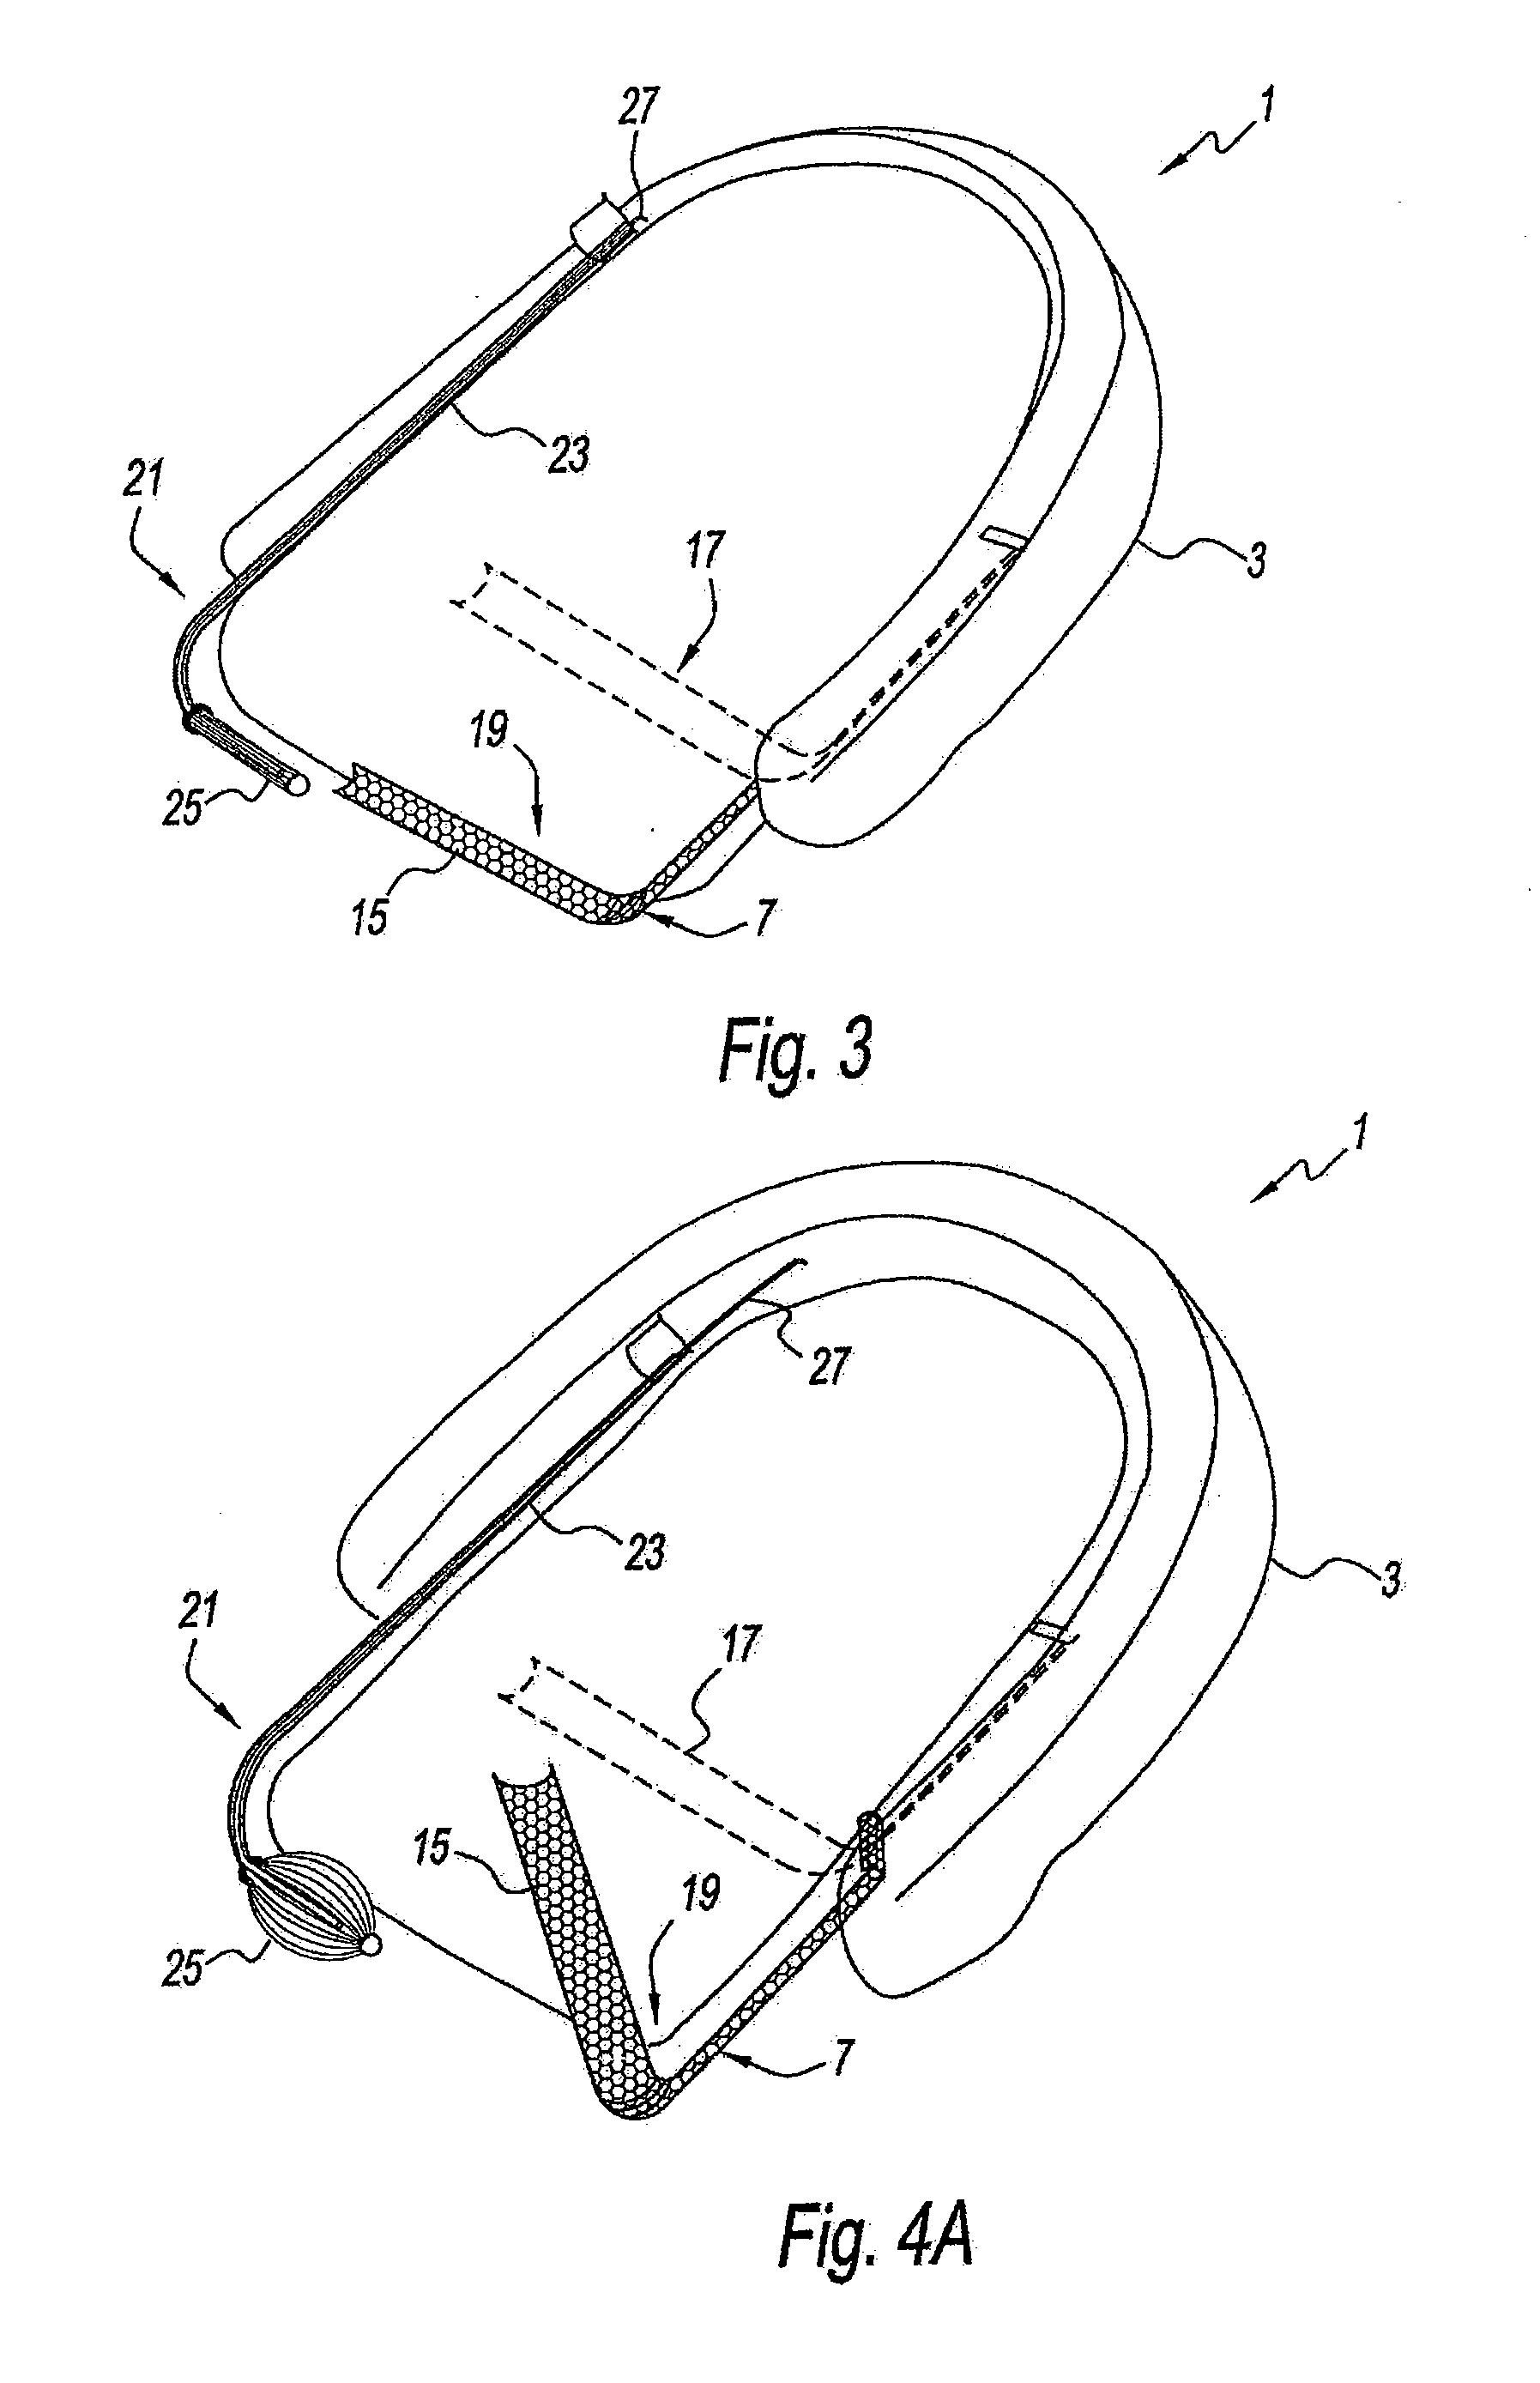 Devices, systems and methods for the treatment of sleep apnea